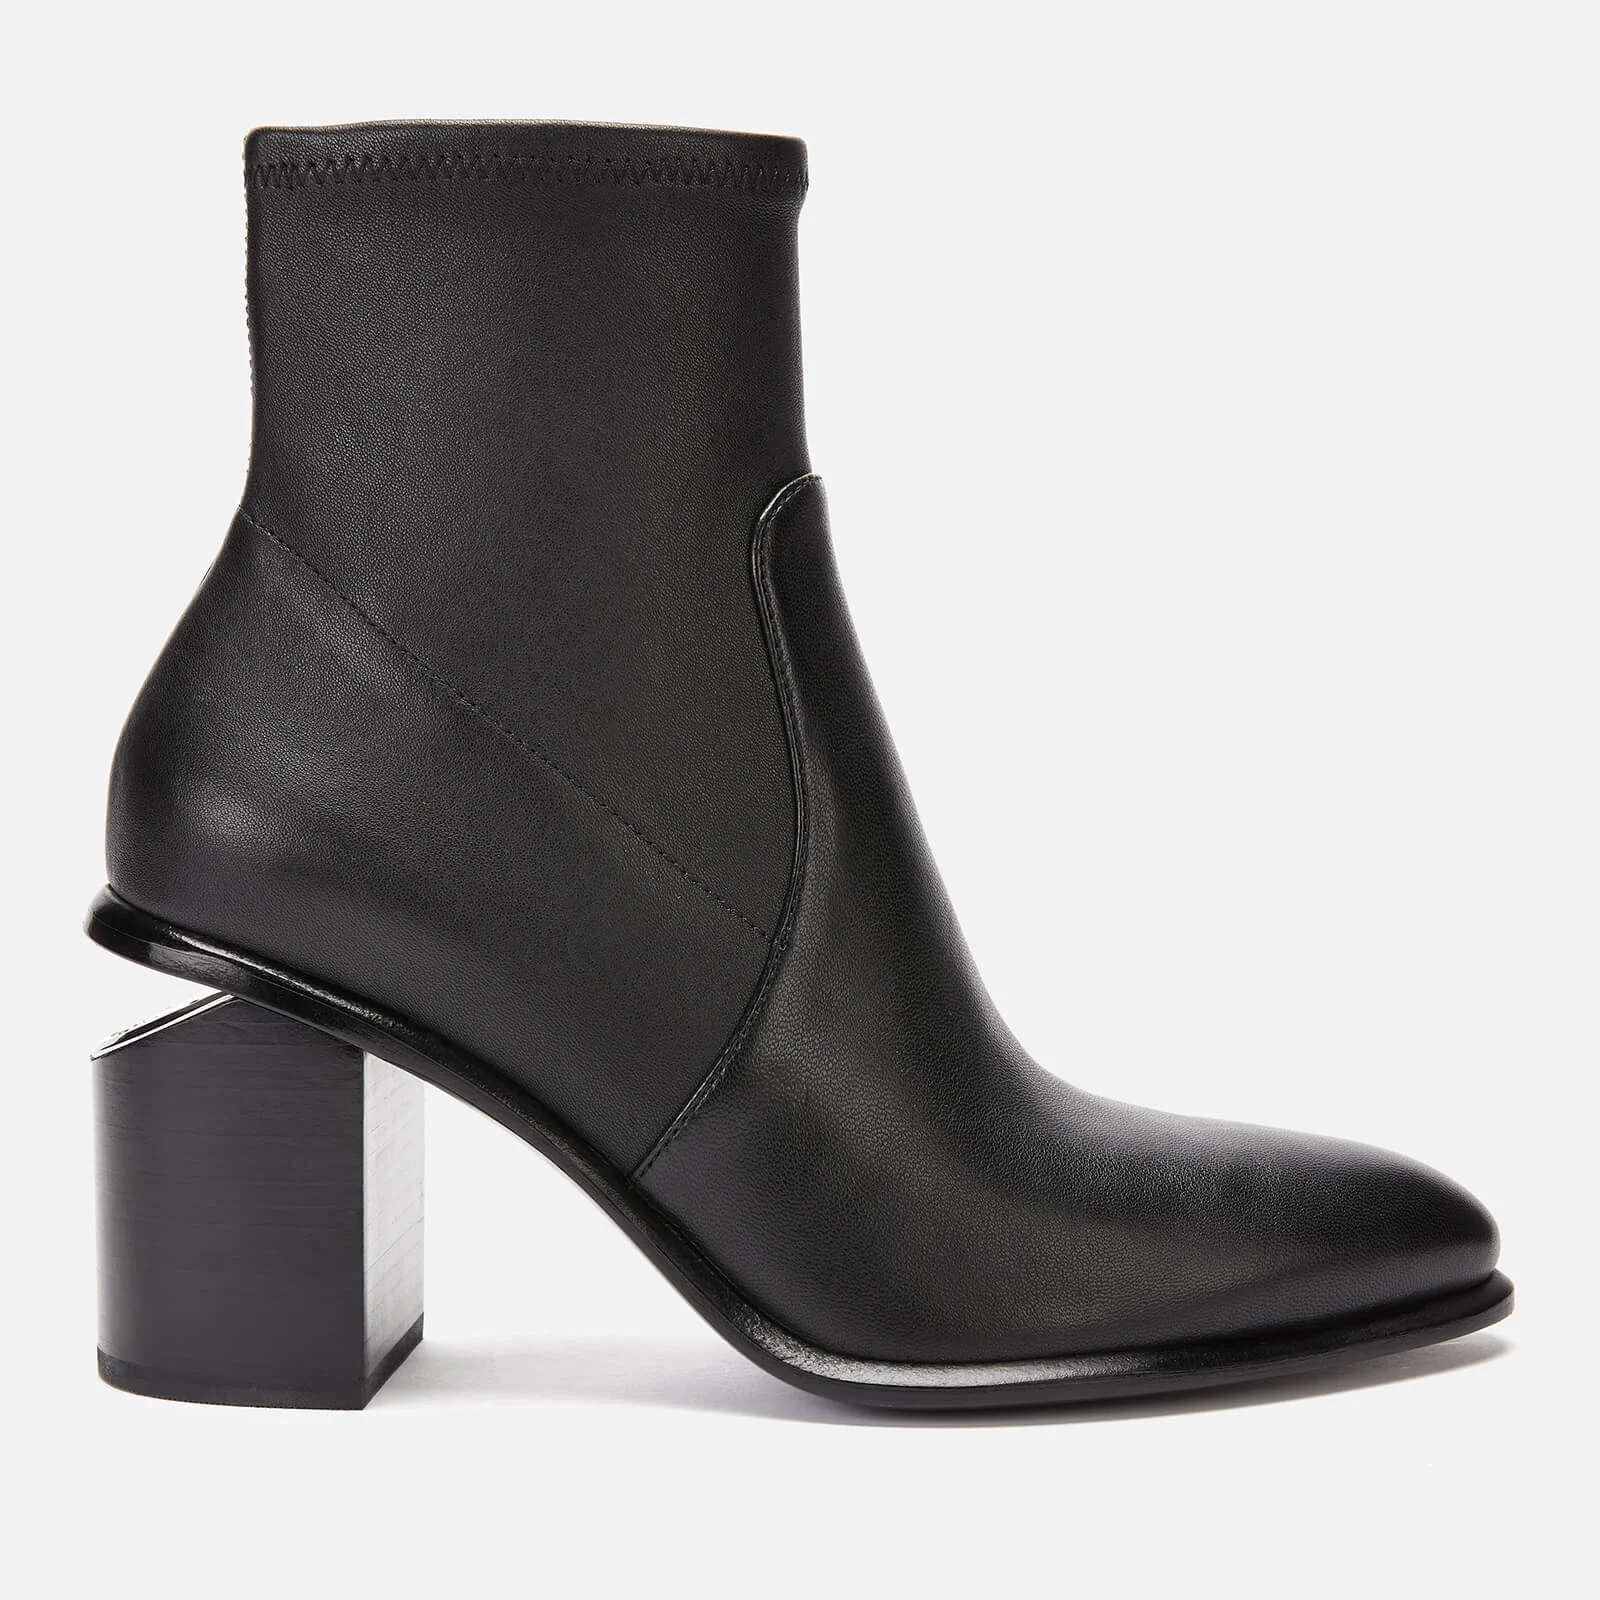 Alexander Wang Women's Anna Stretch Heeled Ankle Boots - Black Image 1